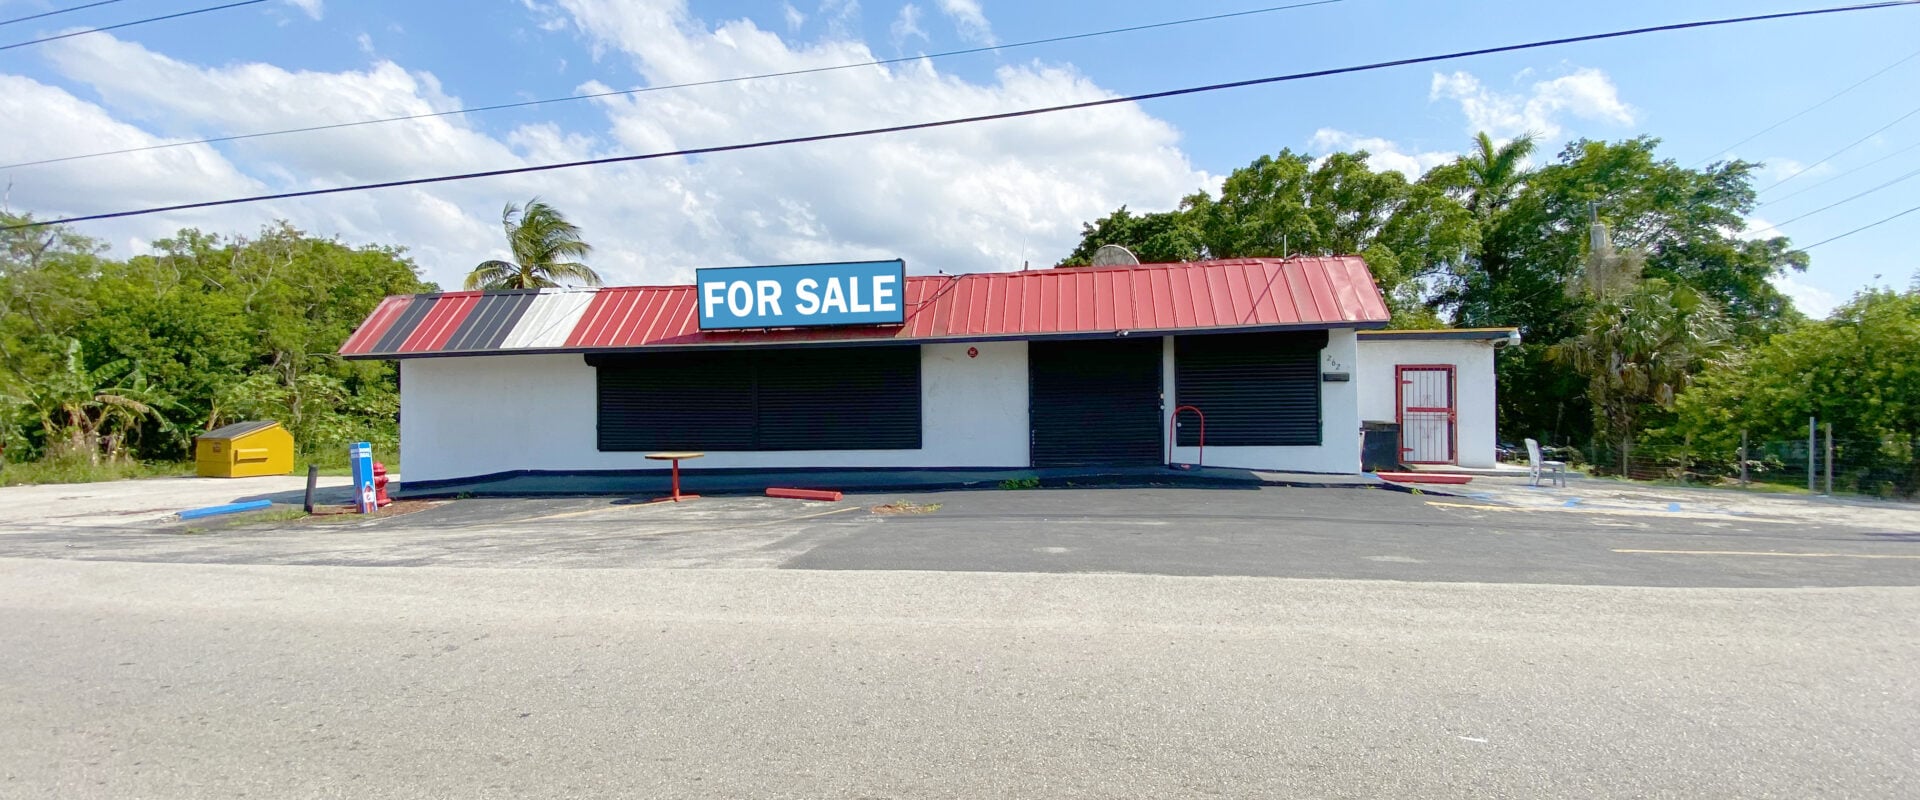 Freestanding Convenience Store For Sale